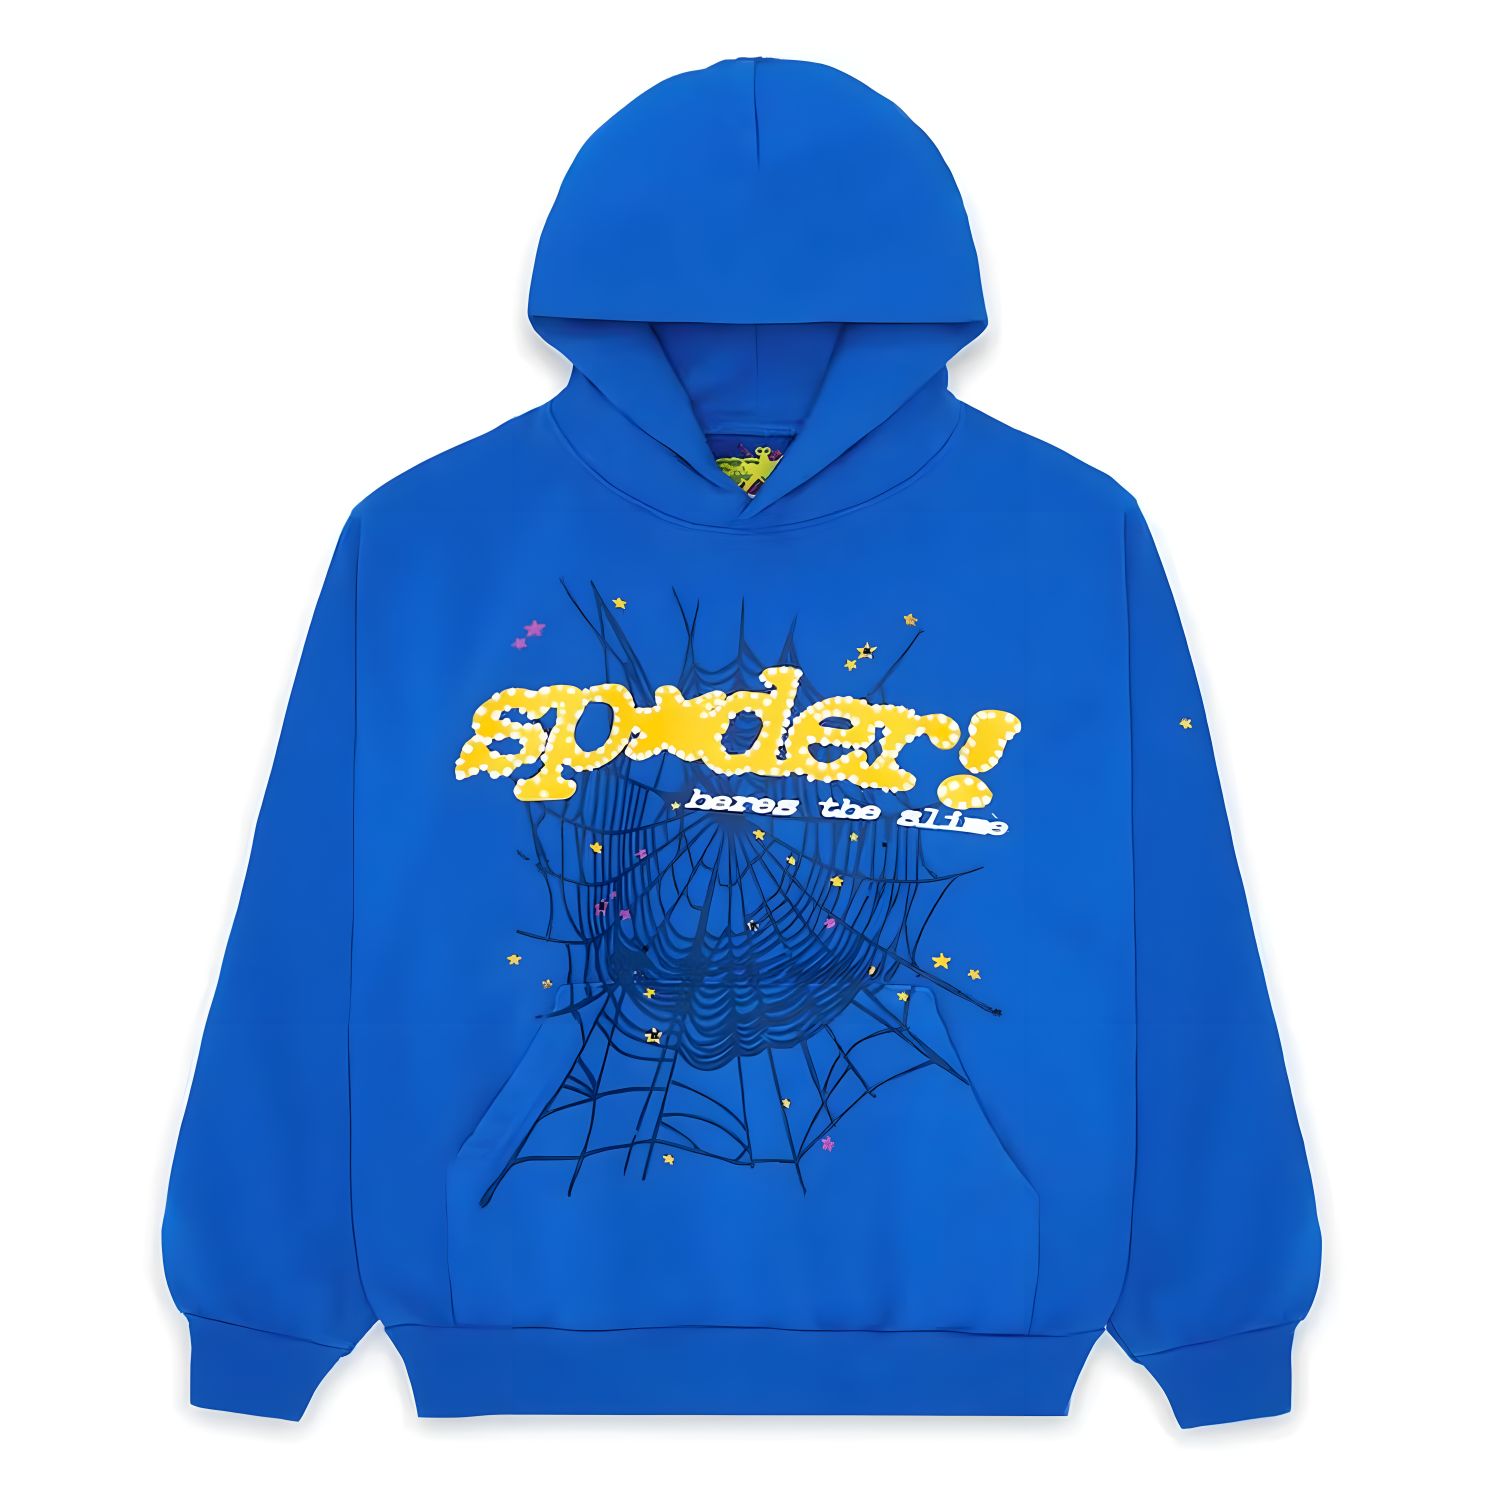 Enjoy a 50% discount! Grab your Young Thug Sp5der Hoodie today